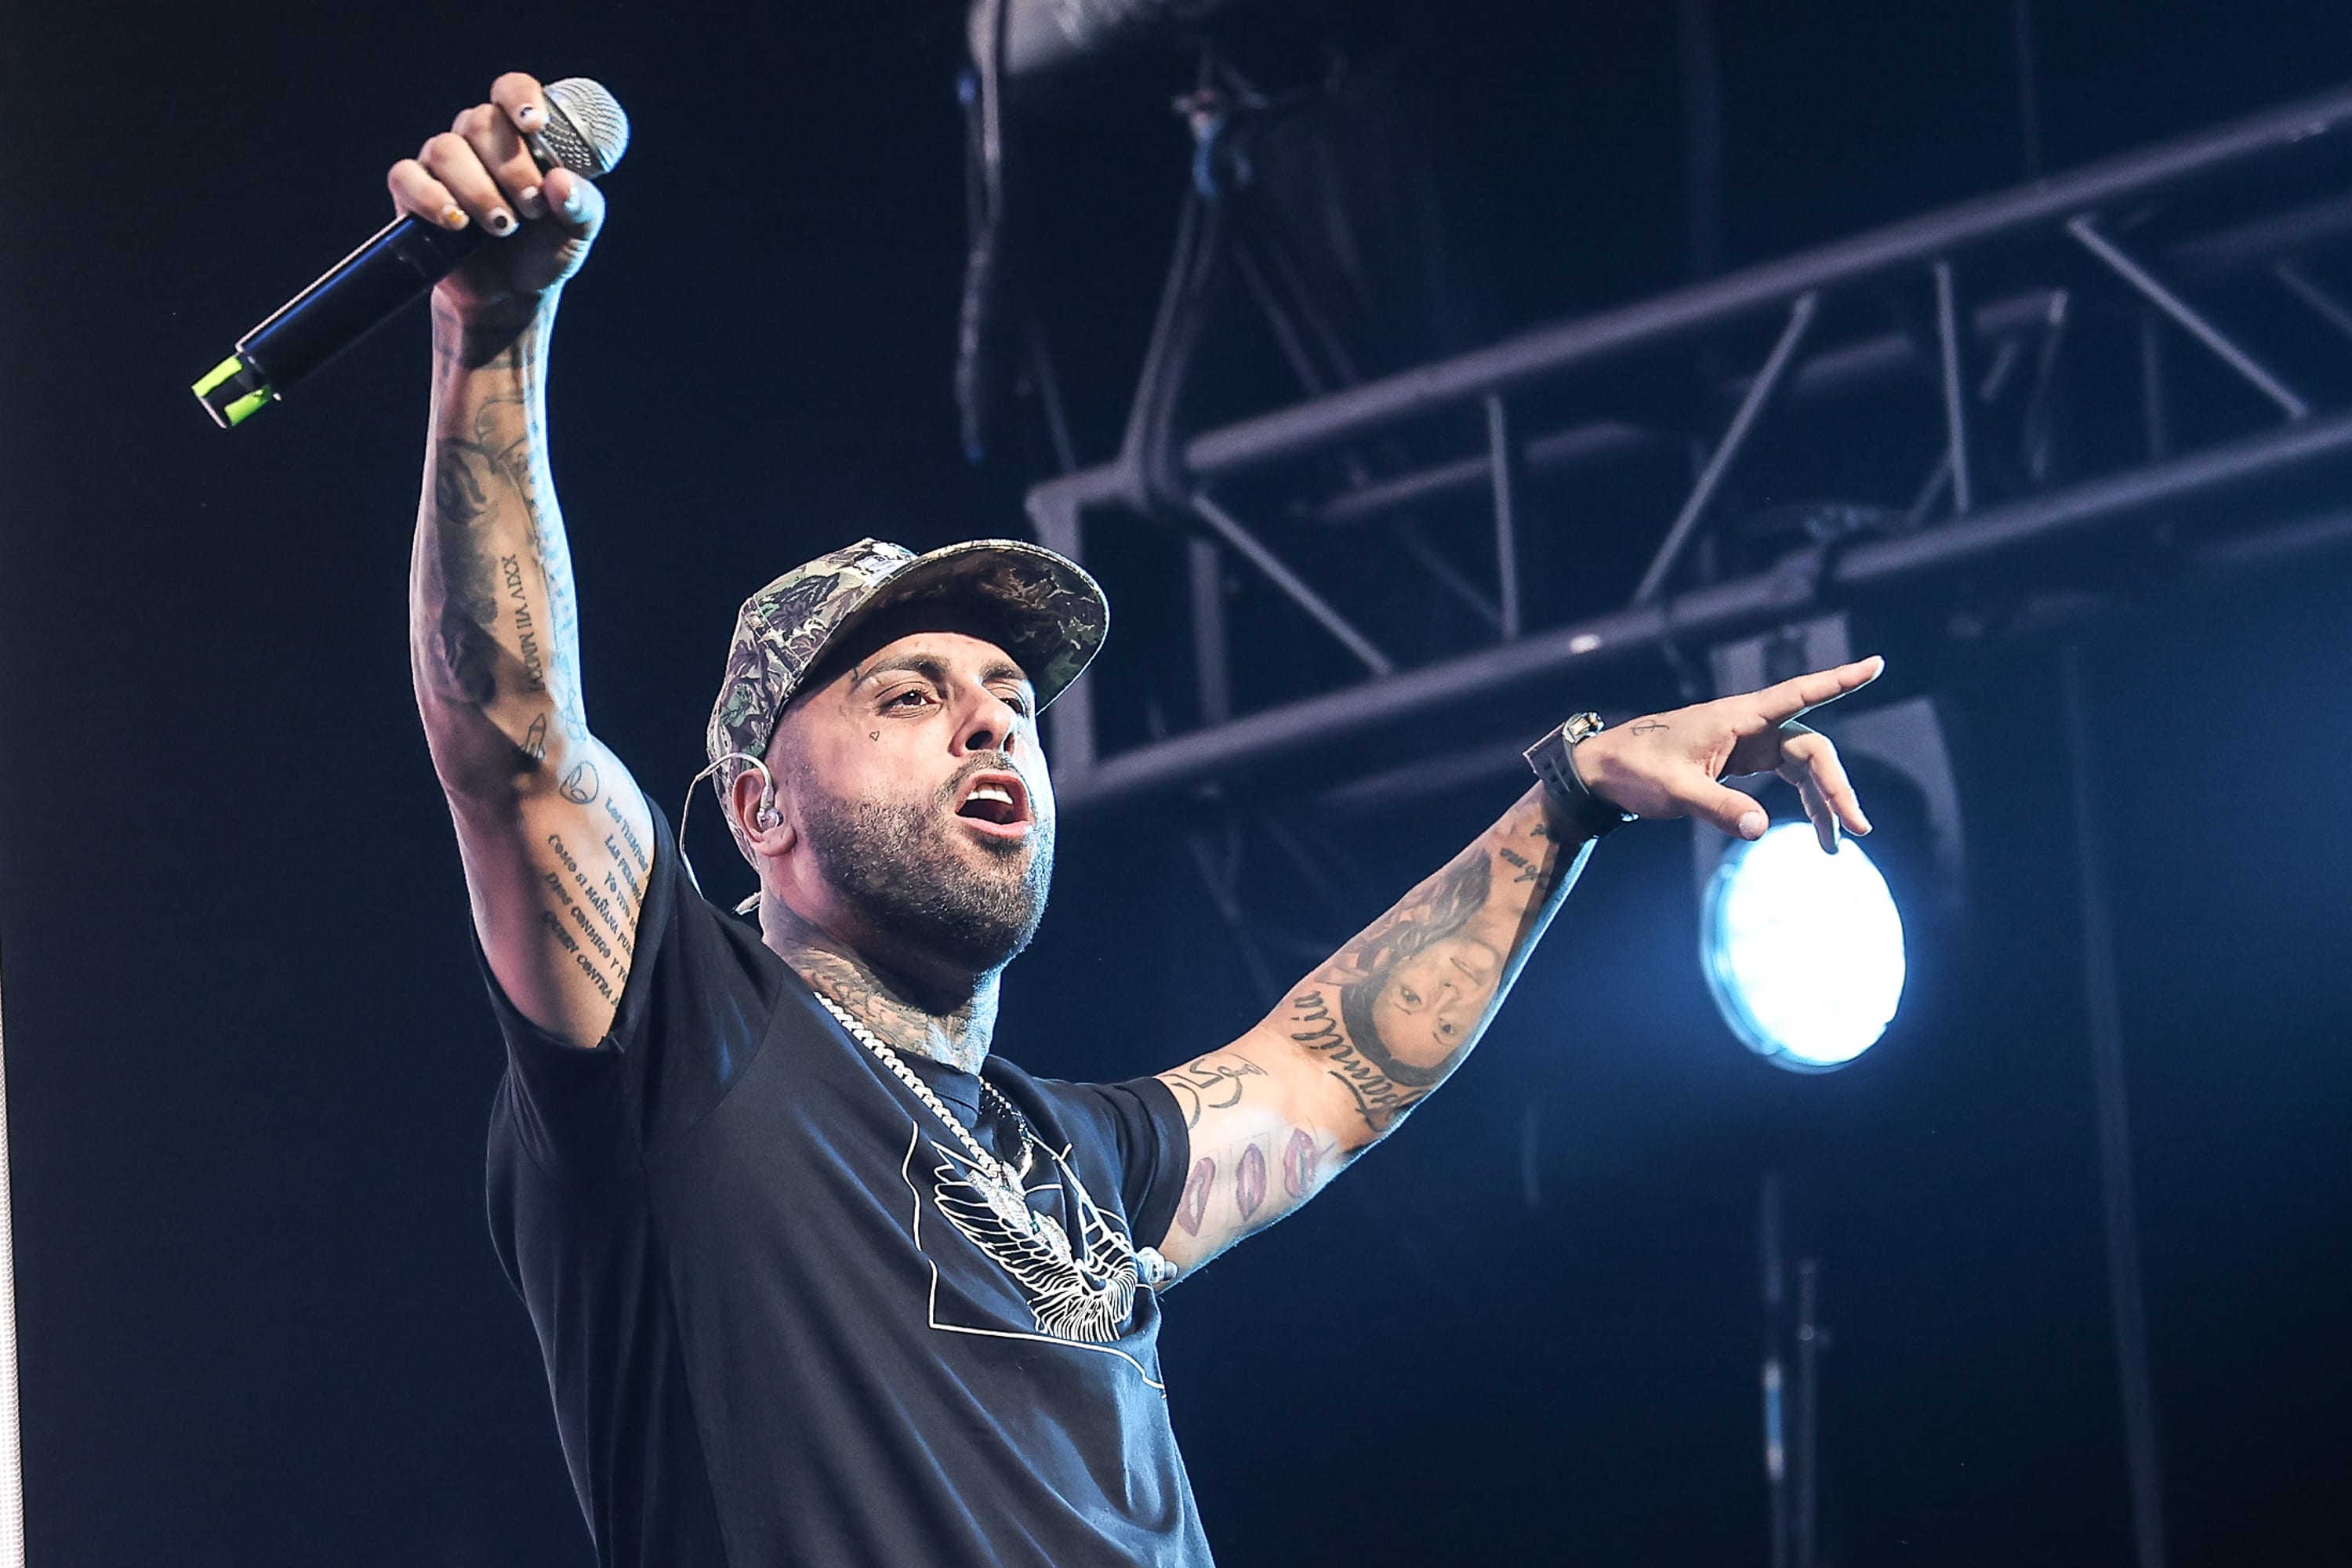 Nicky Jam performing on stage with a microphone